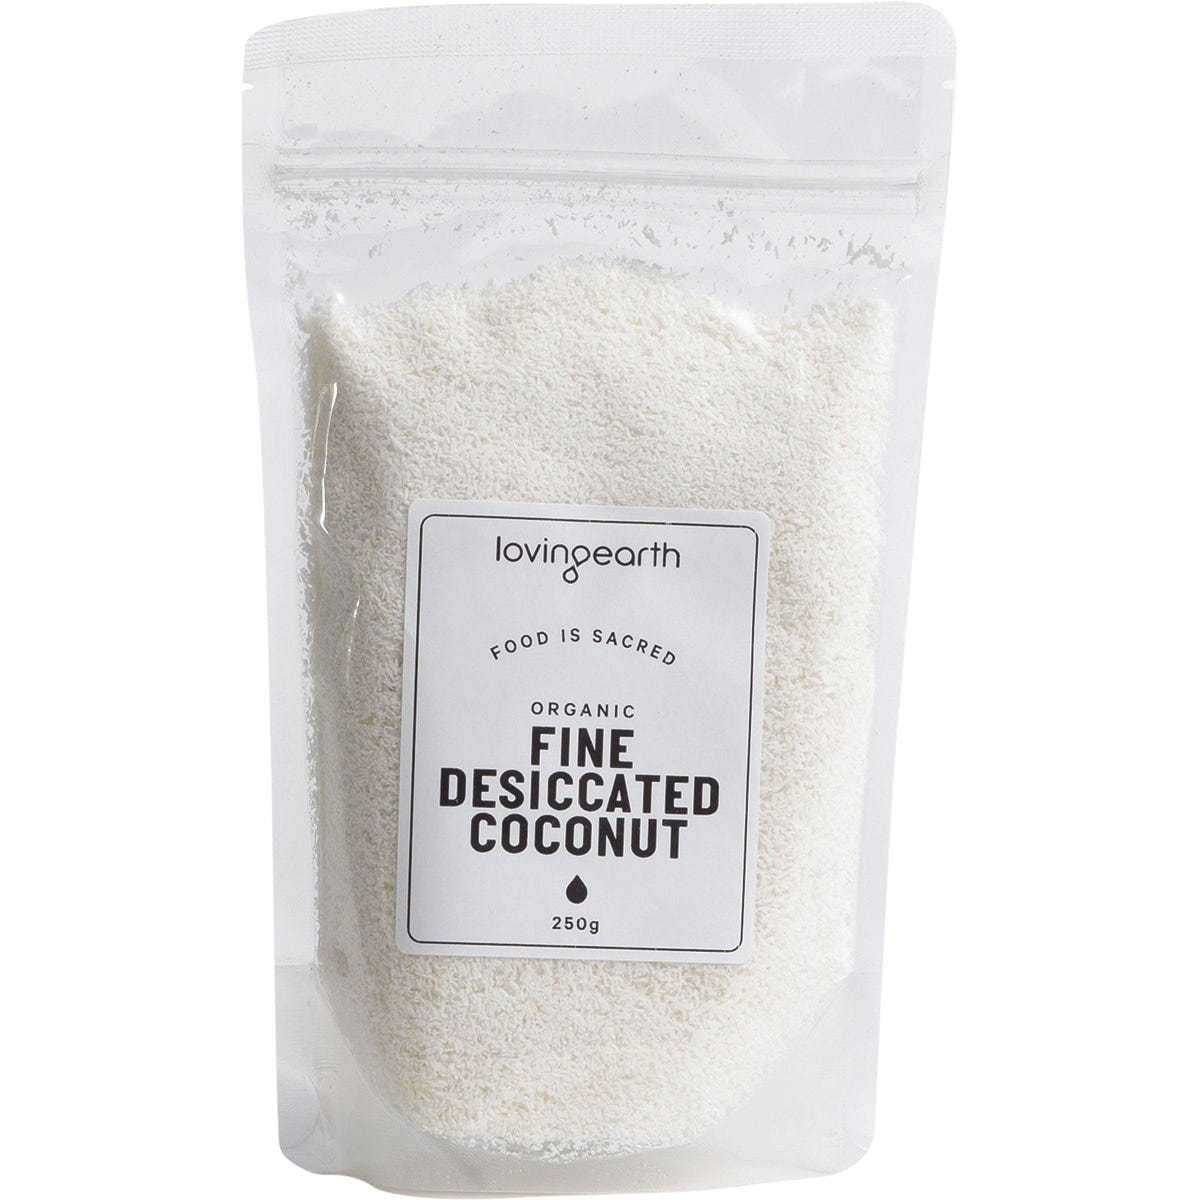 Loving Earth Fine Desiccated Coconut 250g - Dr Earth - Baking